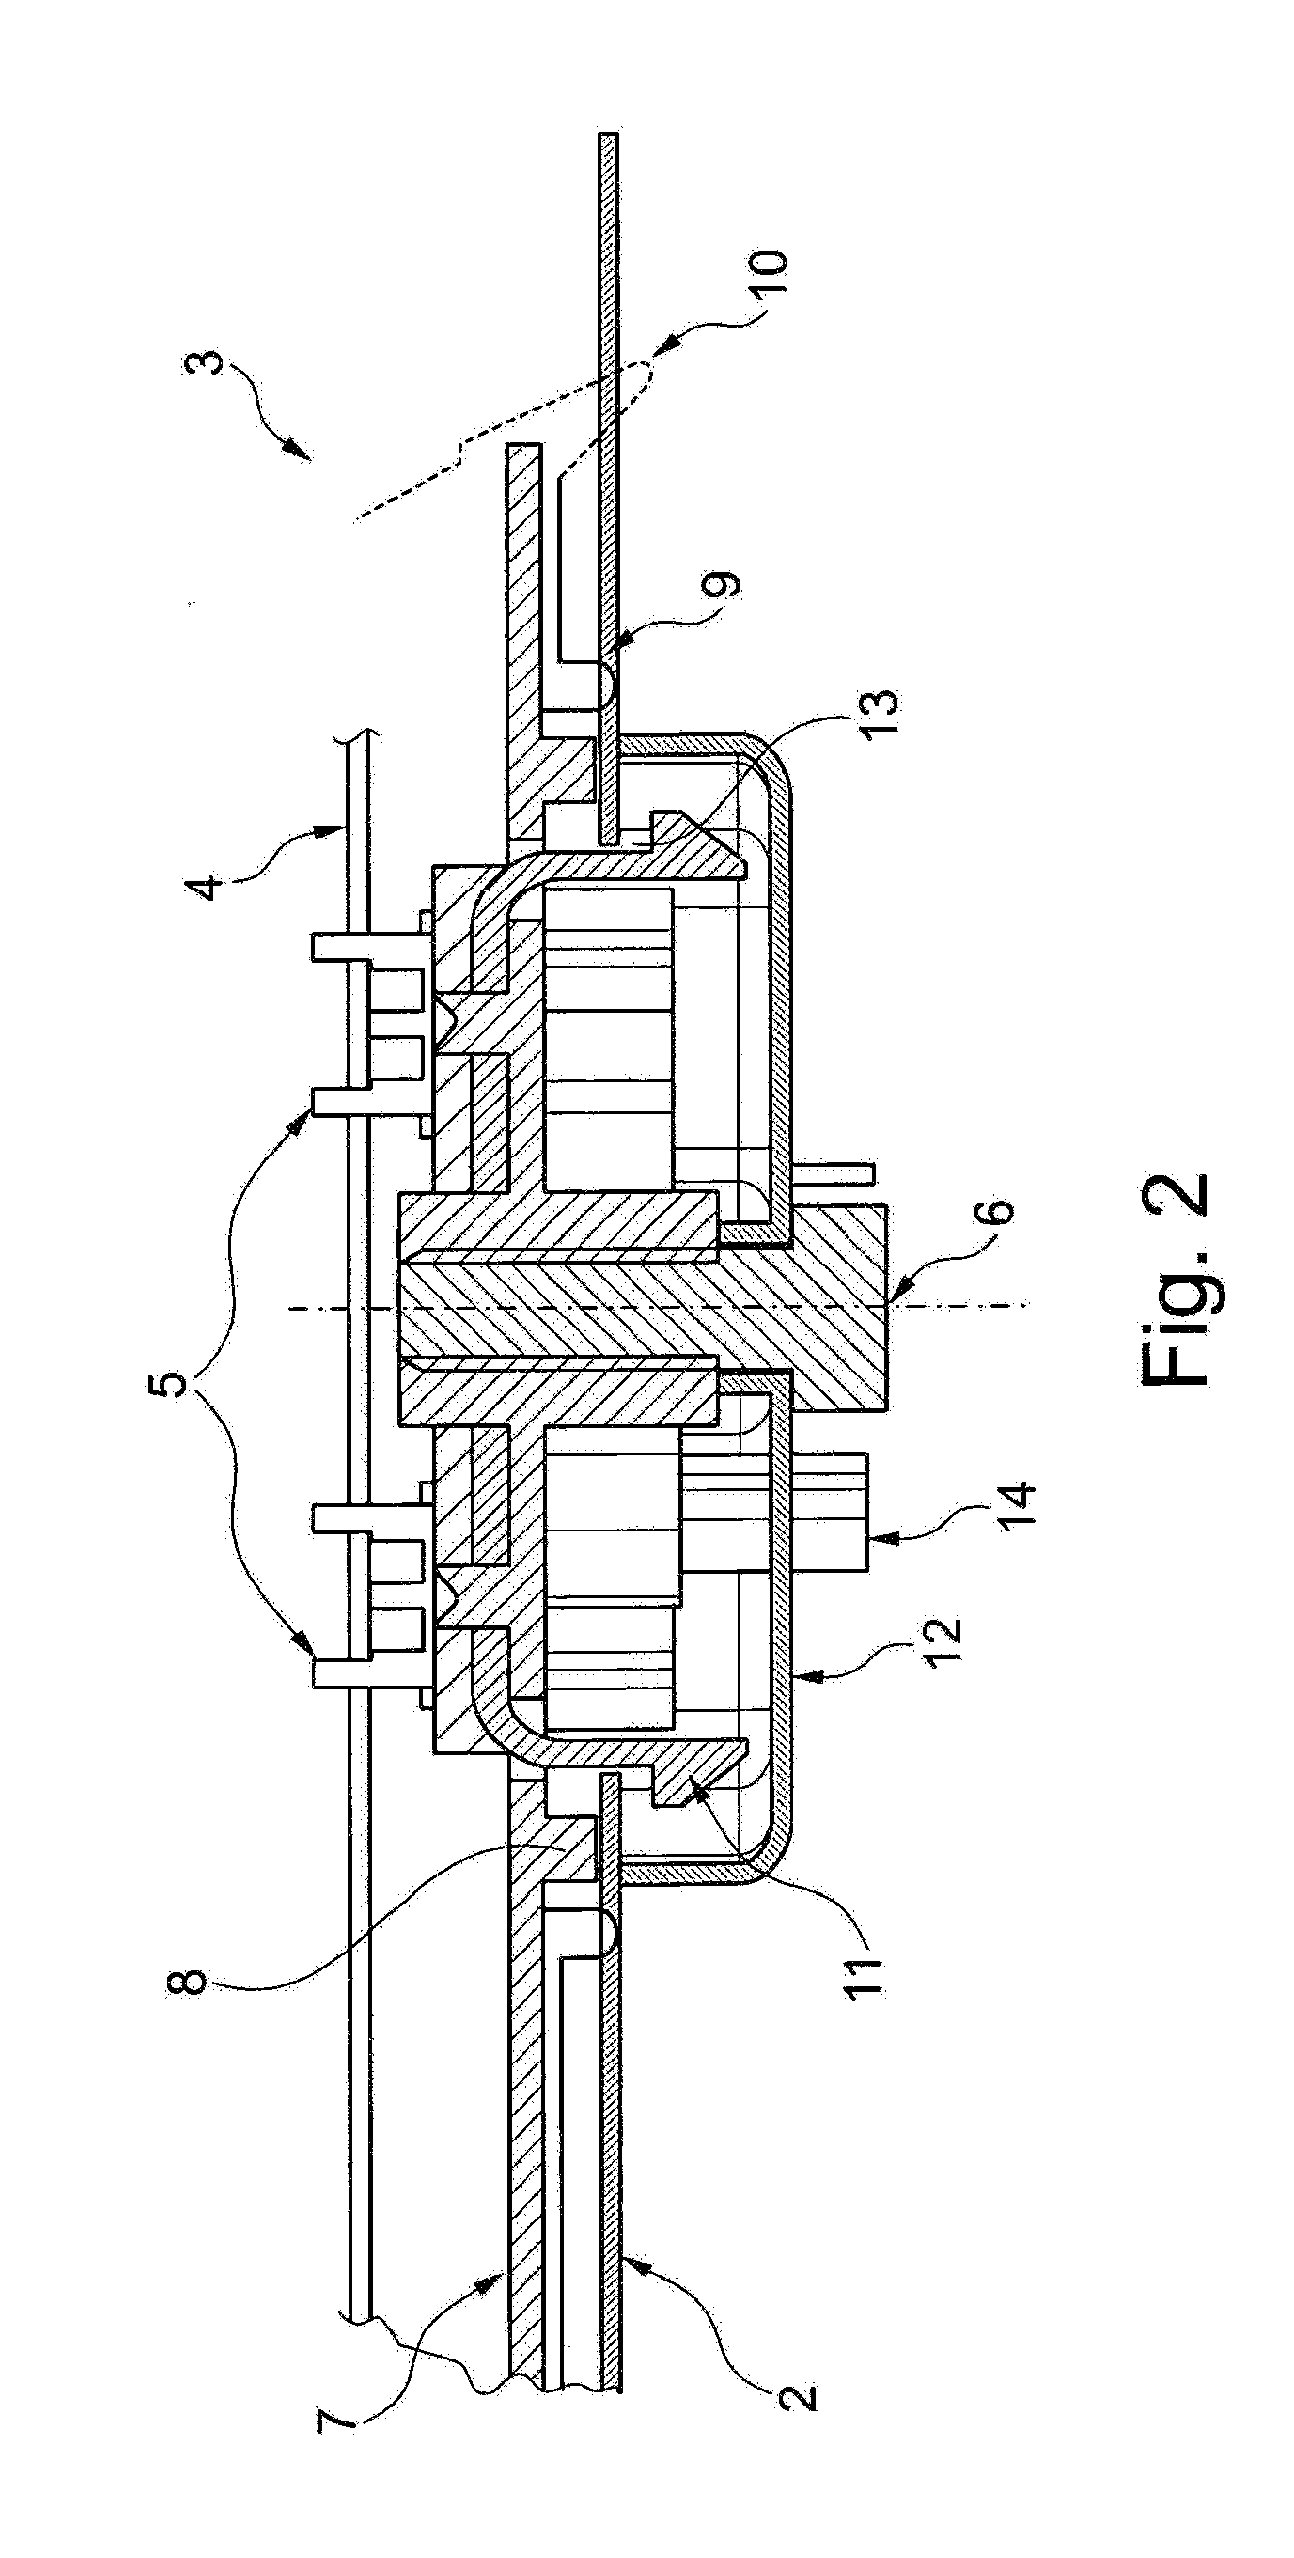 Star-handle system for locking antenna to a vehicle roof